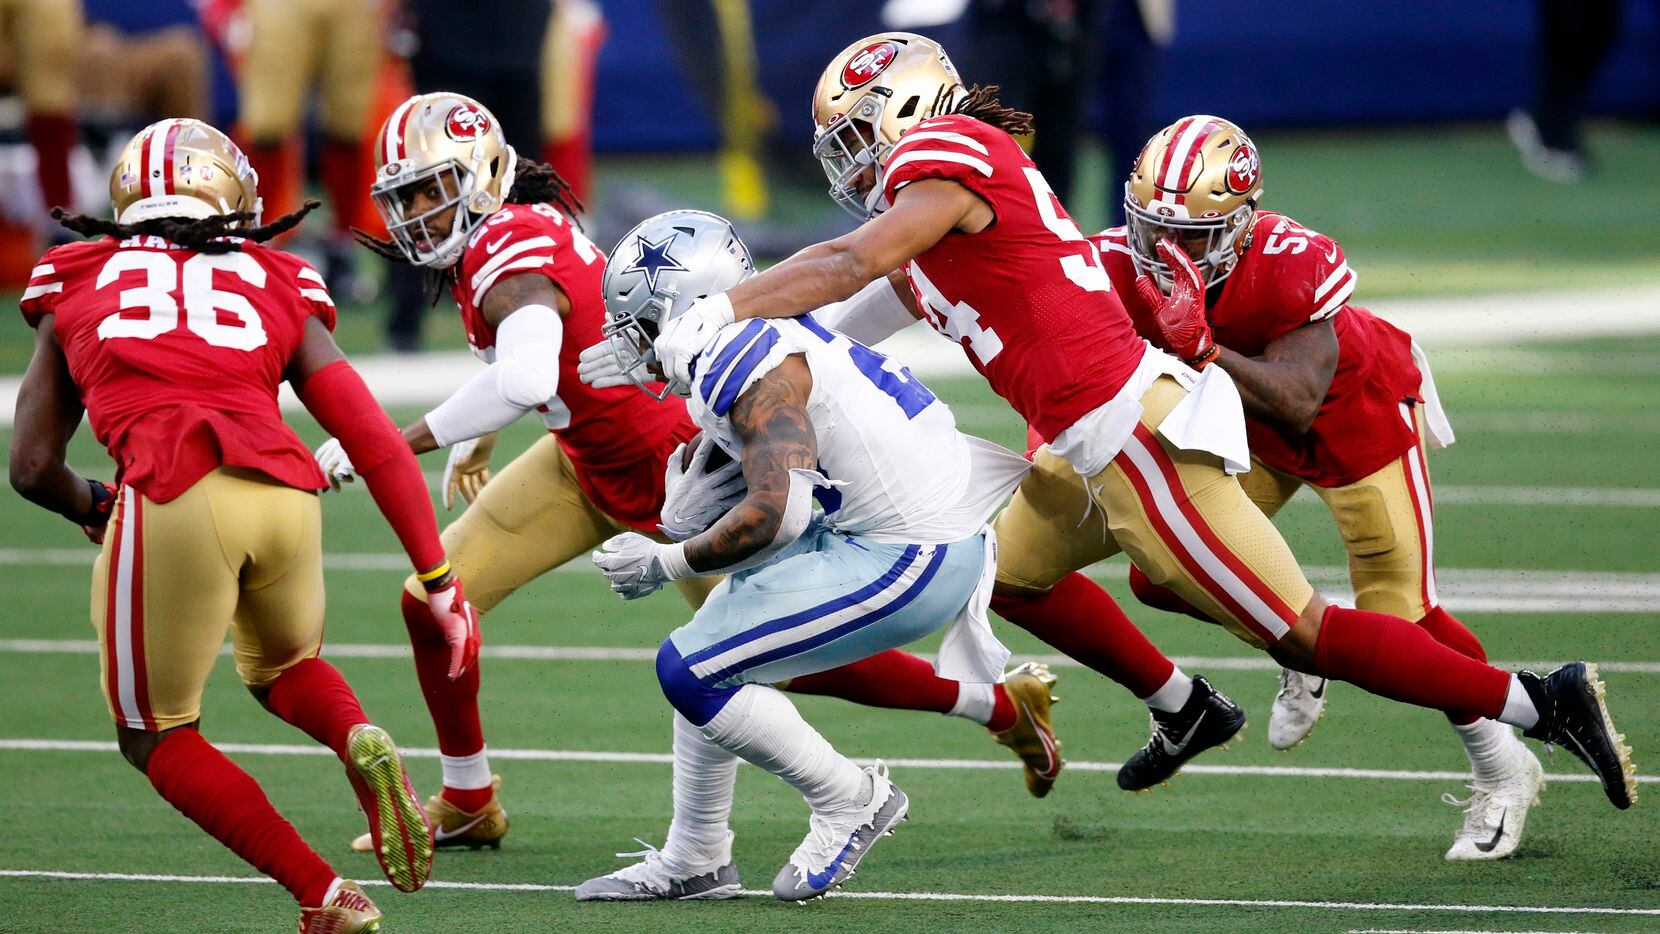 Dallas Cowboys running back Tony Pollard (20) broke away from several San Francisco 49ers defenders, including middle linebacker Fred Warner (54), for a fourth quarter touchdown at AT&T Stadium in Arlington, Texas, Sunday, December 20, 2020.